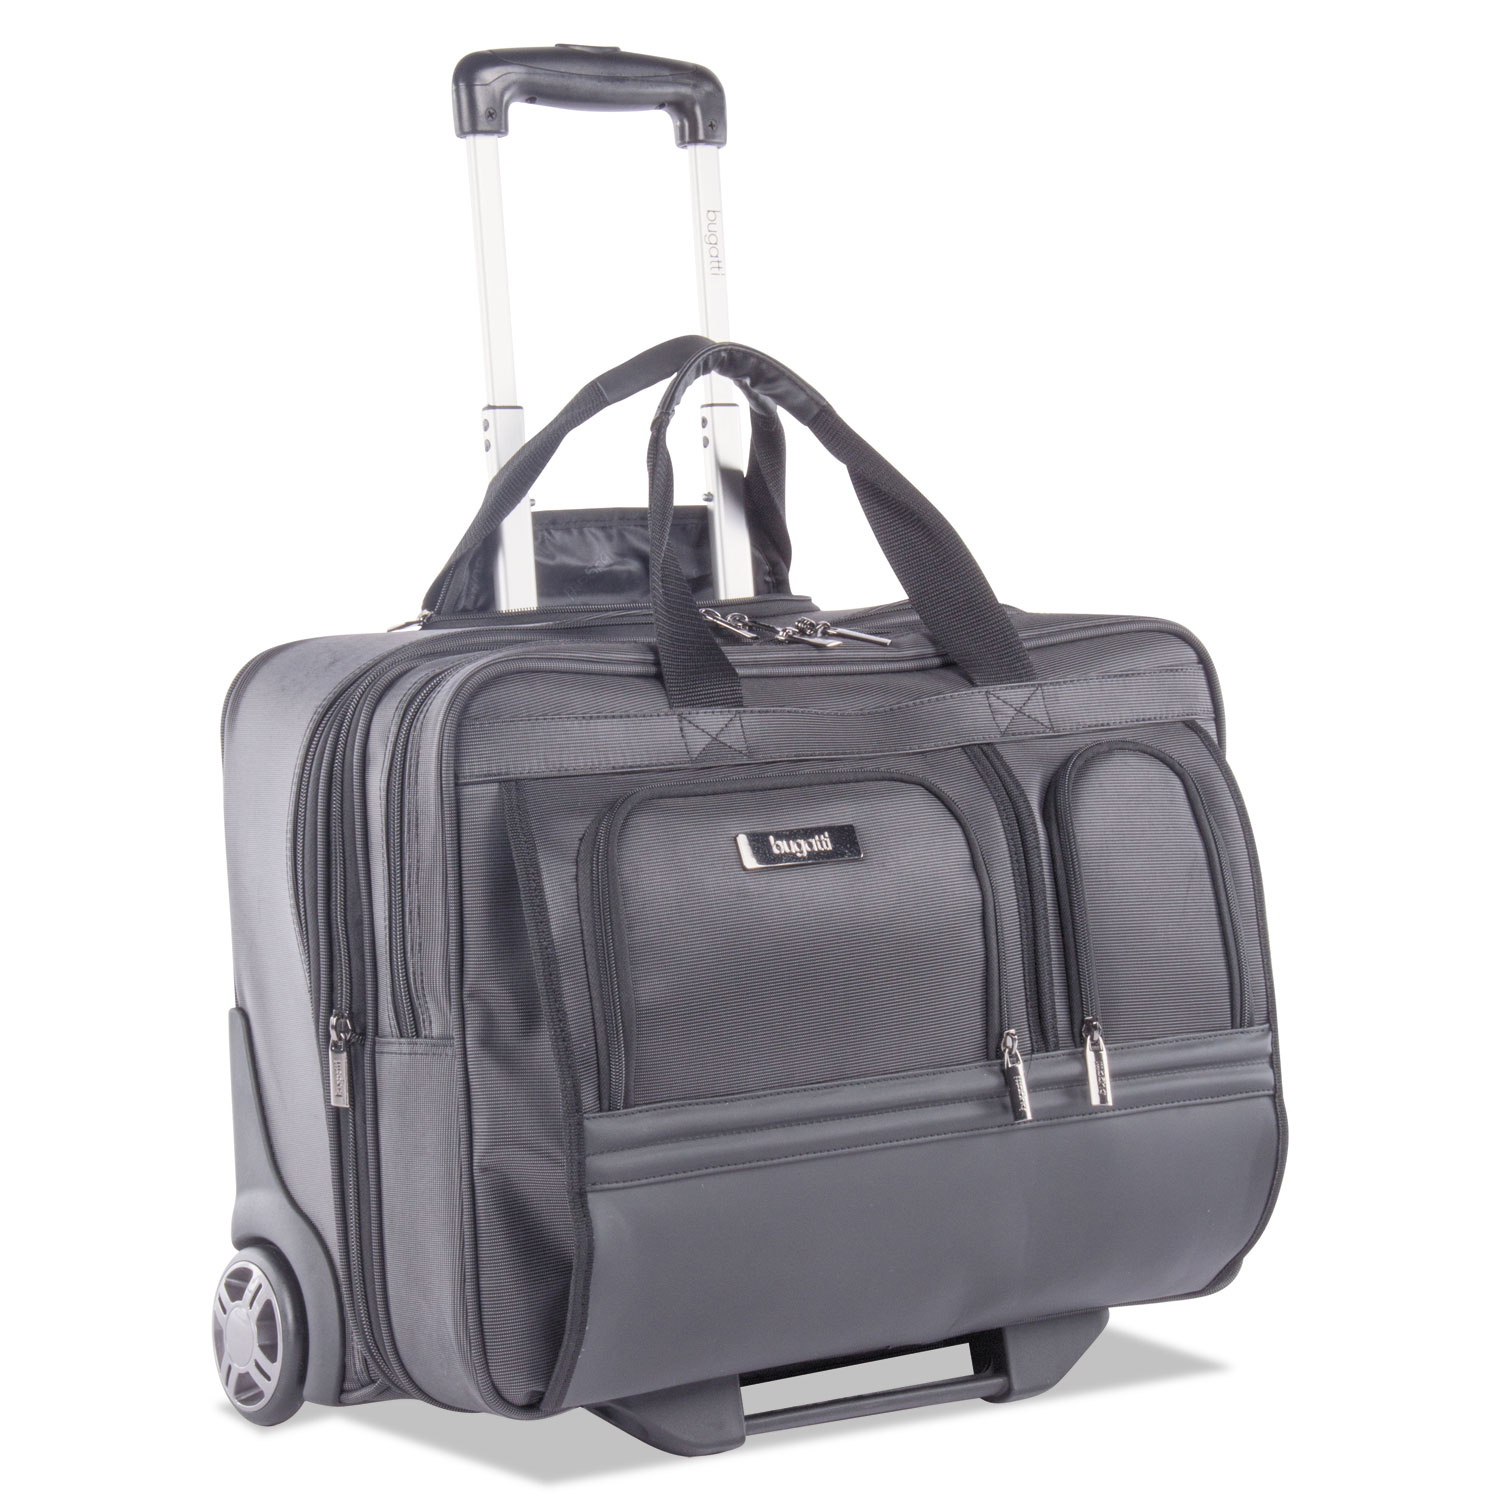 Harry Business Case on Wheels, 8.25 x 8.25 x 13.5, Polyester, Black